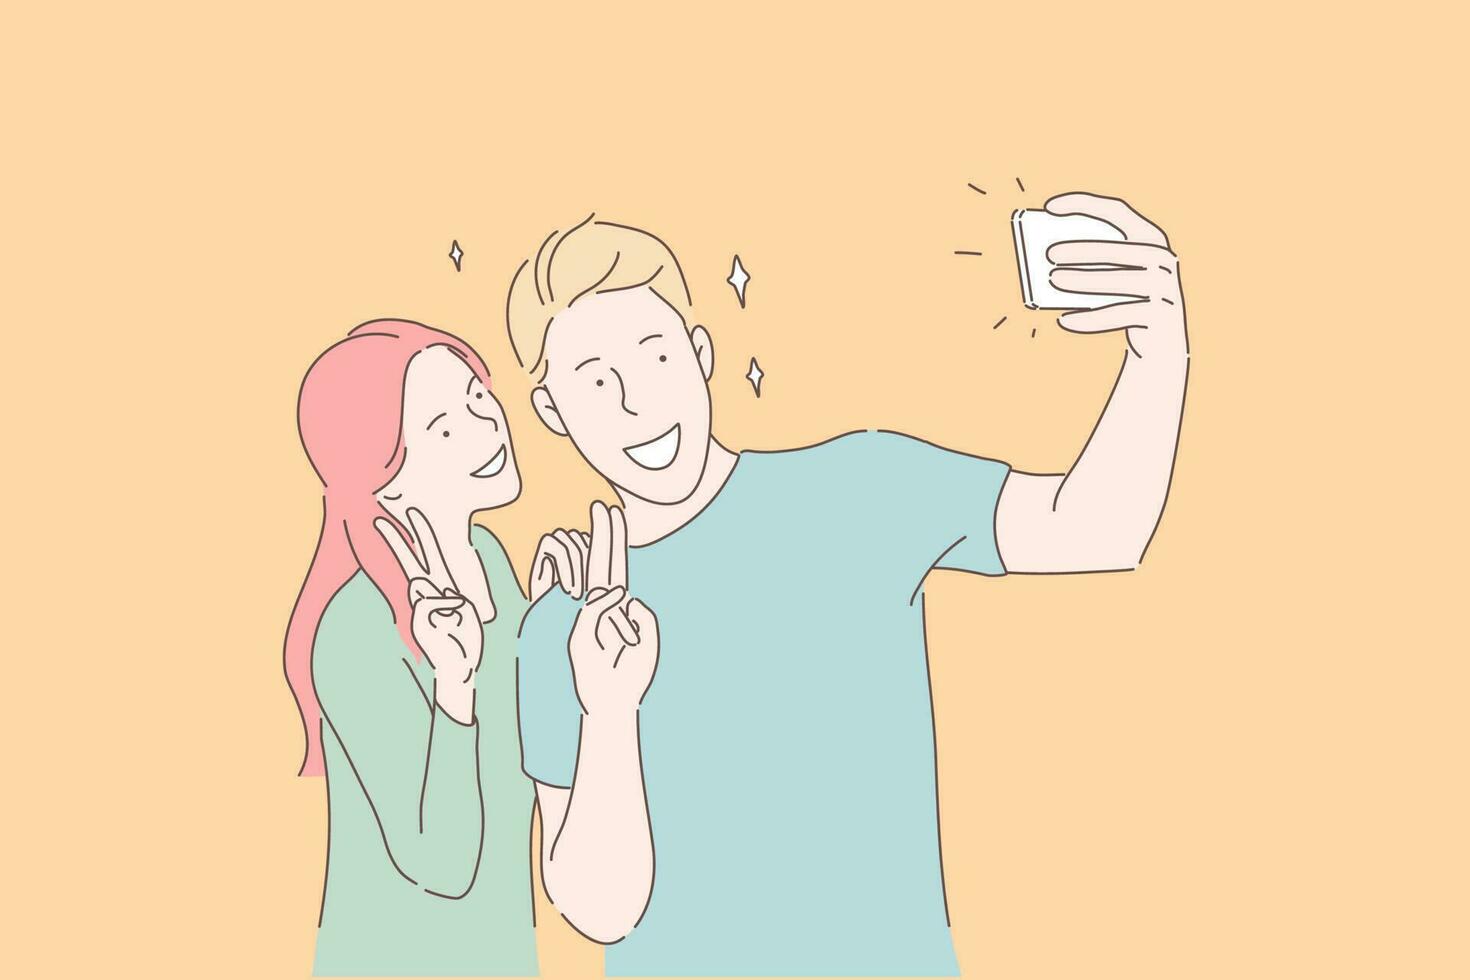 Making selfie, smiling couple, victory gesture concept. Boy and girl, romantic couple posing for smartphone camera. Cheerful teenagers taking picture using mobile phone. Simple flat vector